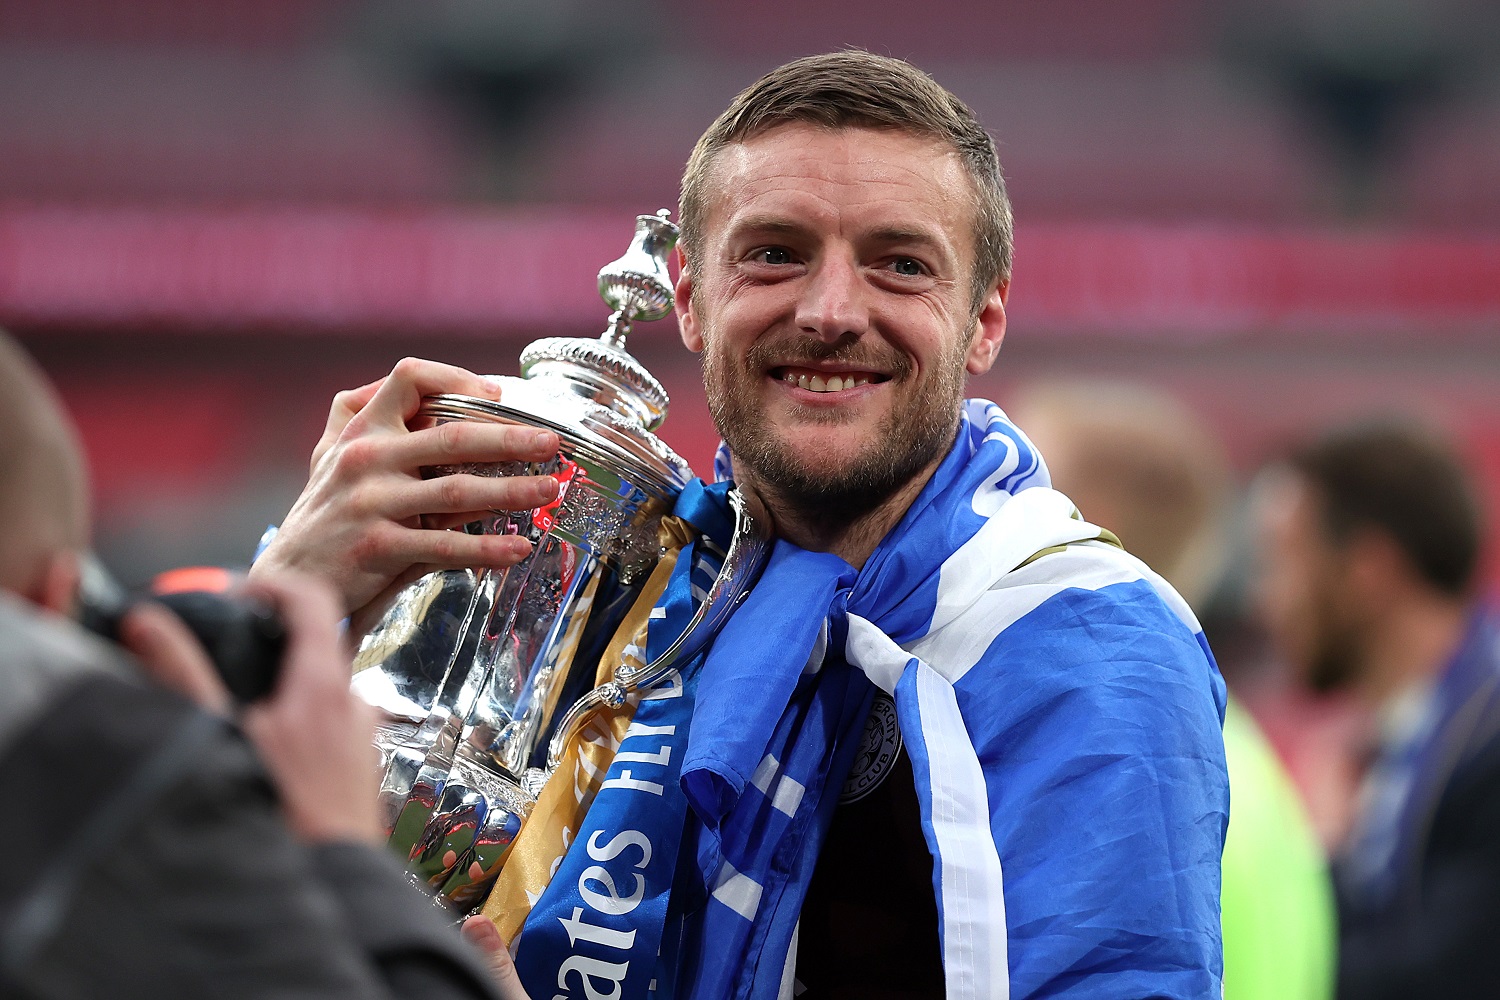 Jamie Vardy of Leicester City celebrates with the FA Cup trophy following The Emirates FA Cup Final match vs. Chelsea at Wembley Stadium on May 15, 2021.